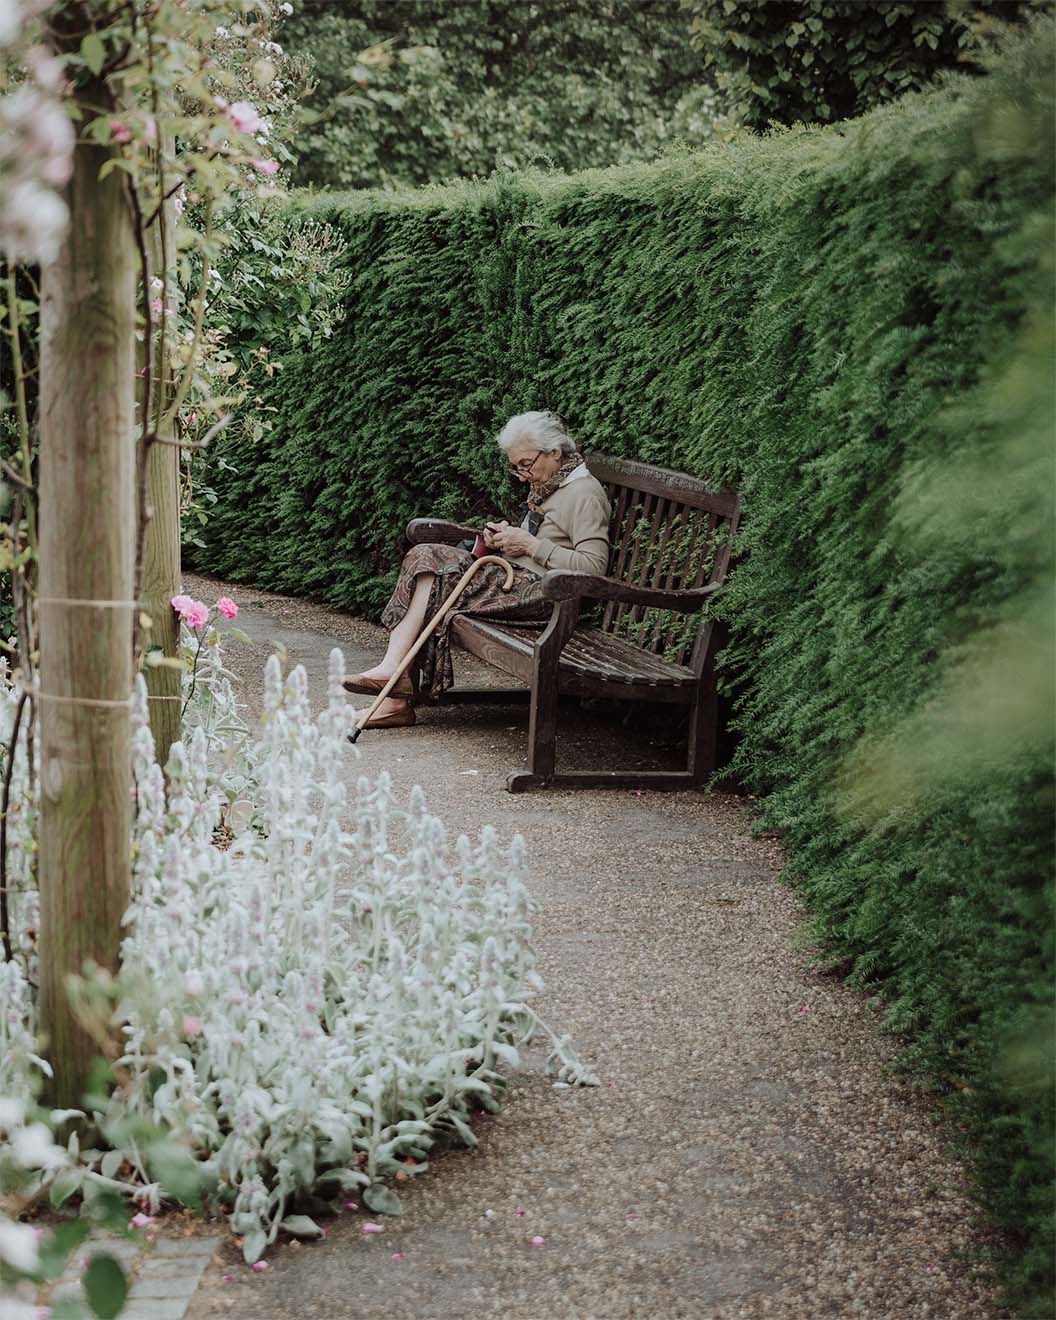 A resident reading in the garden